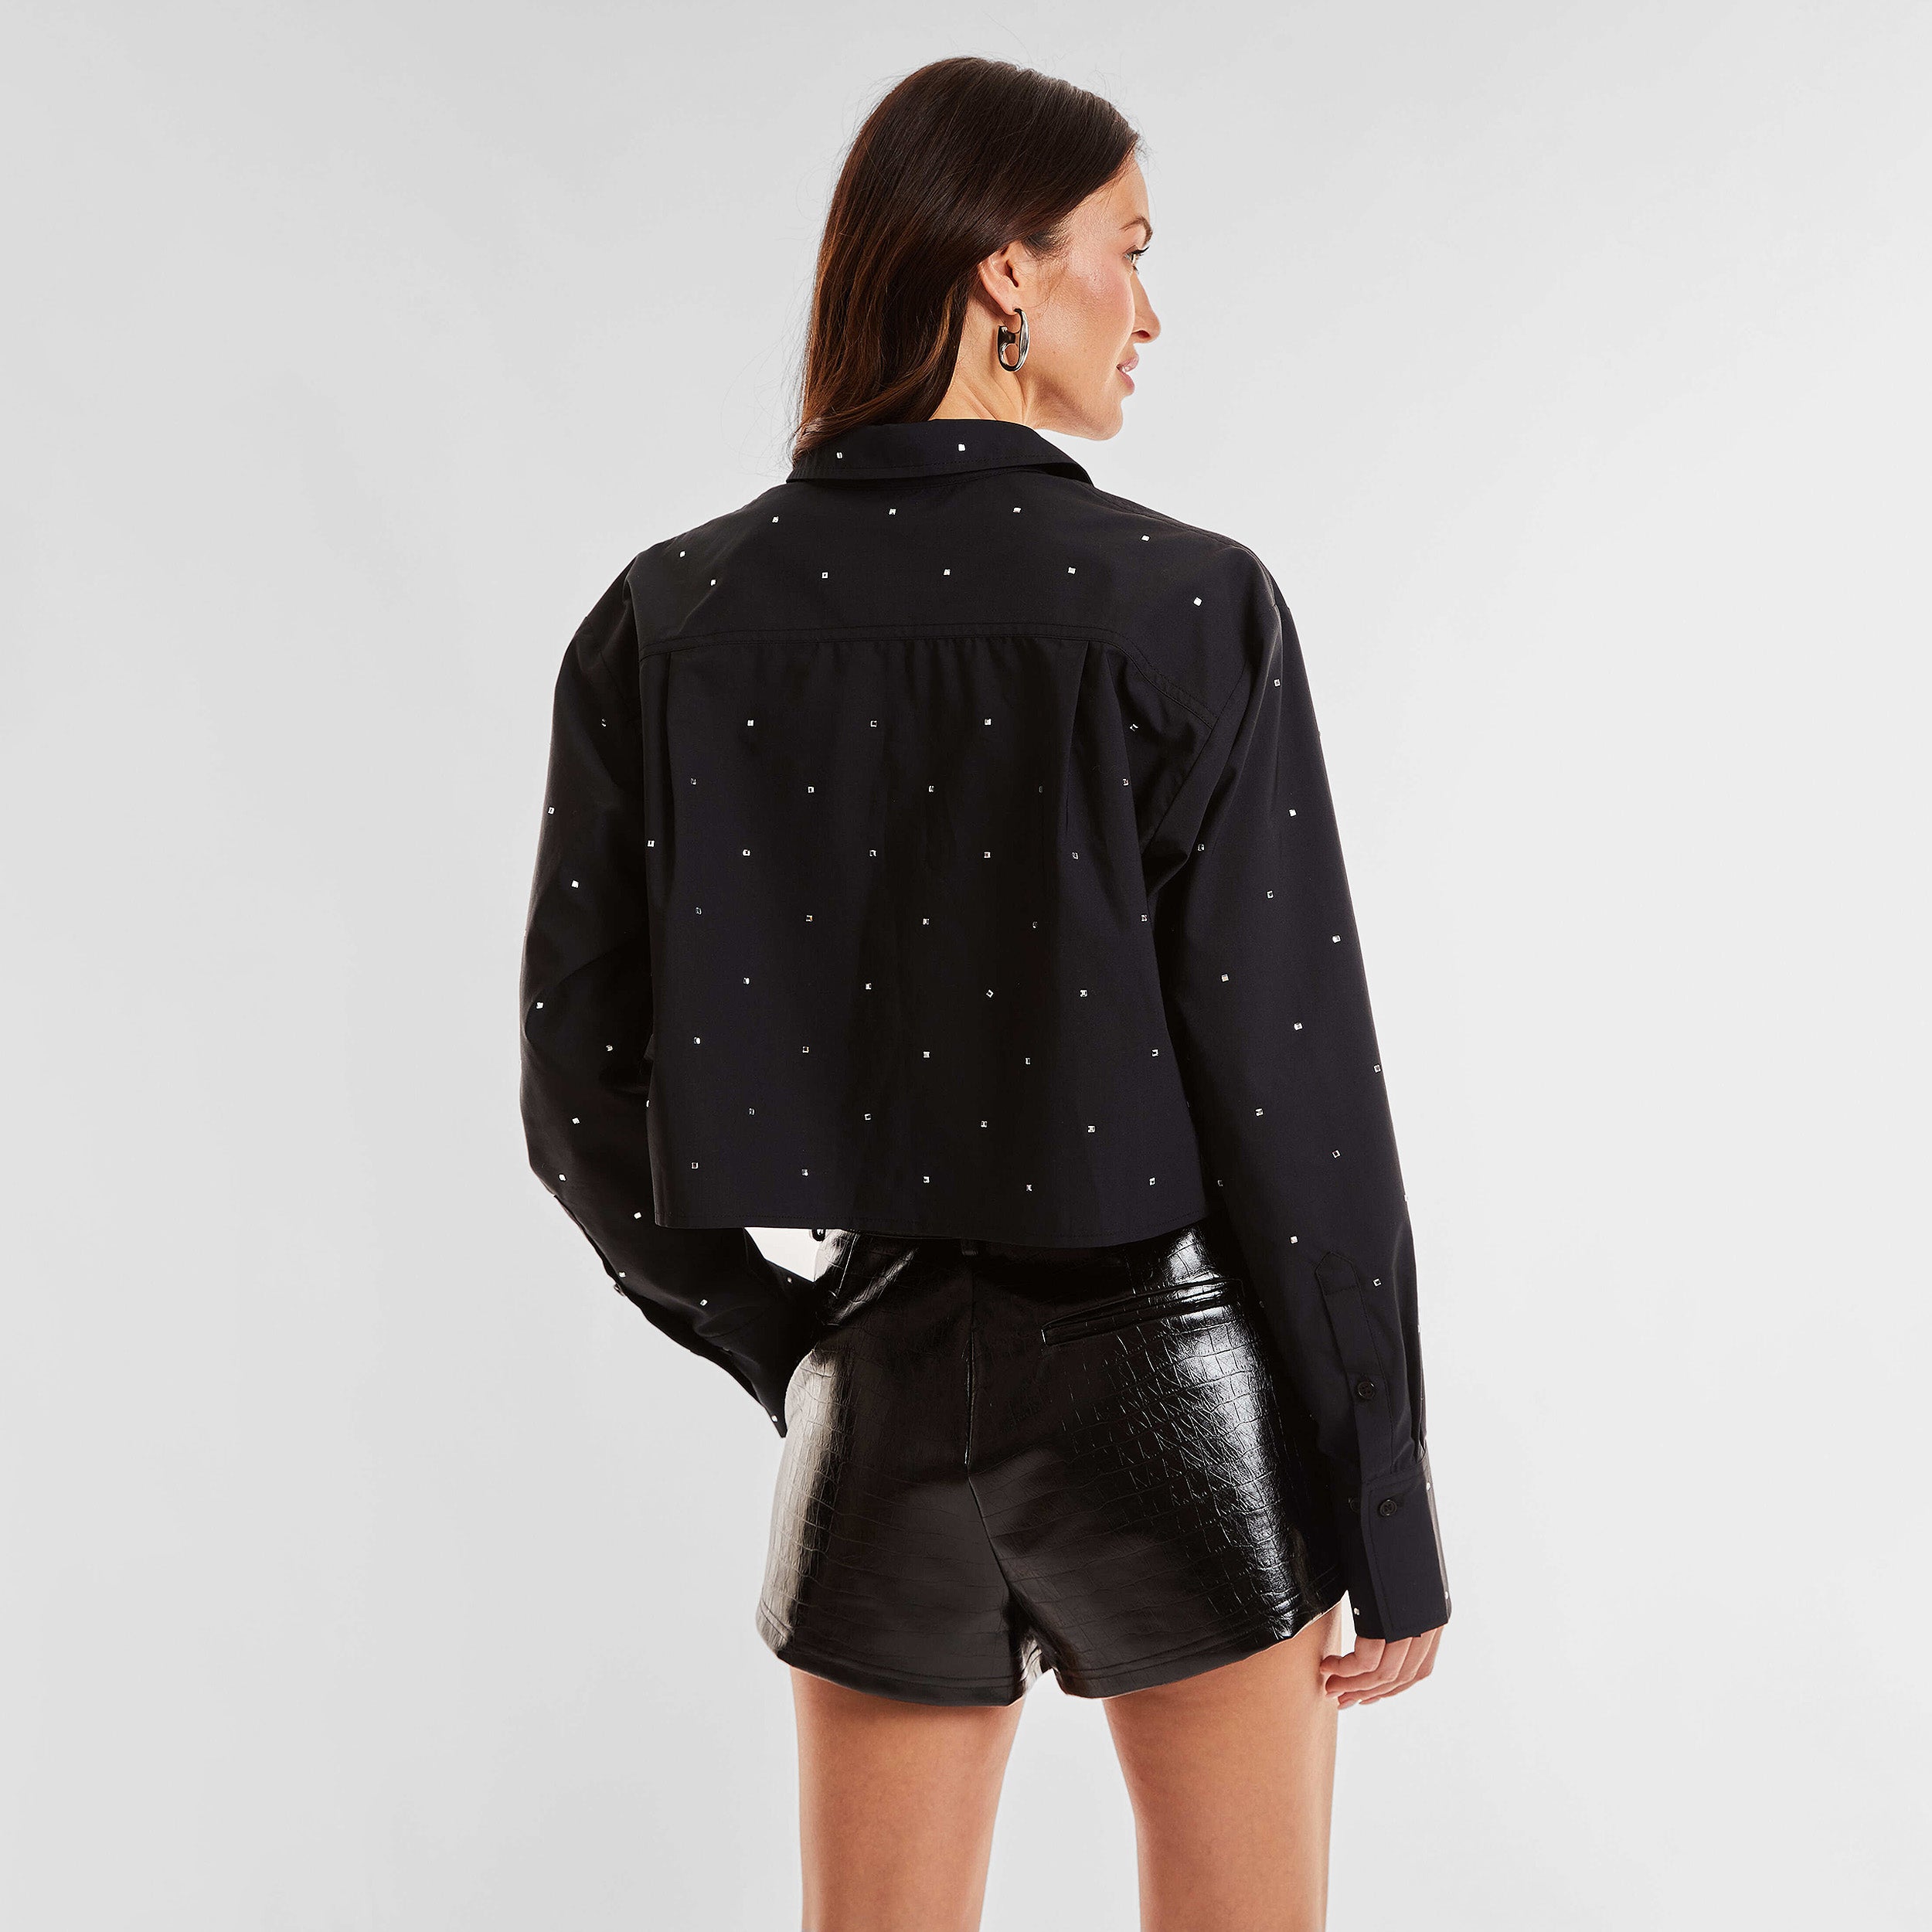 Rear view of woman wearing a black cropped button down shirt with crystal embellishments and croco pattern embossed faux leather shorts.